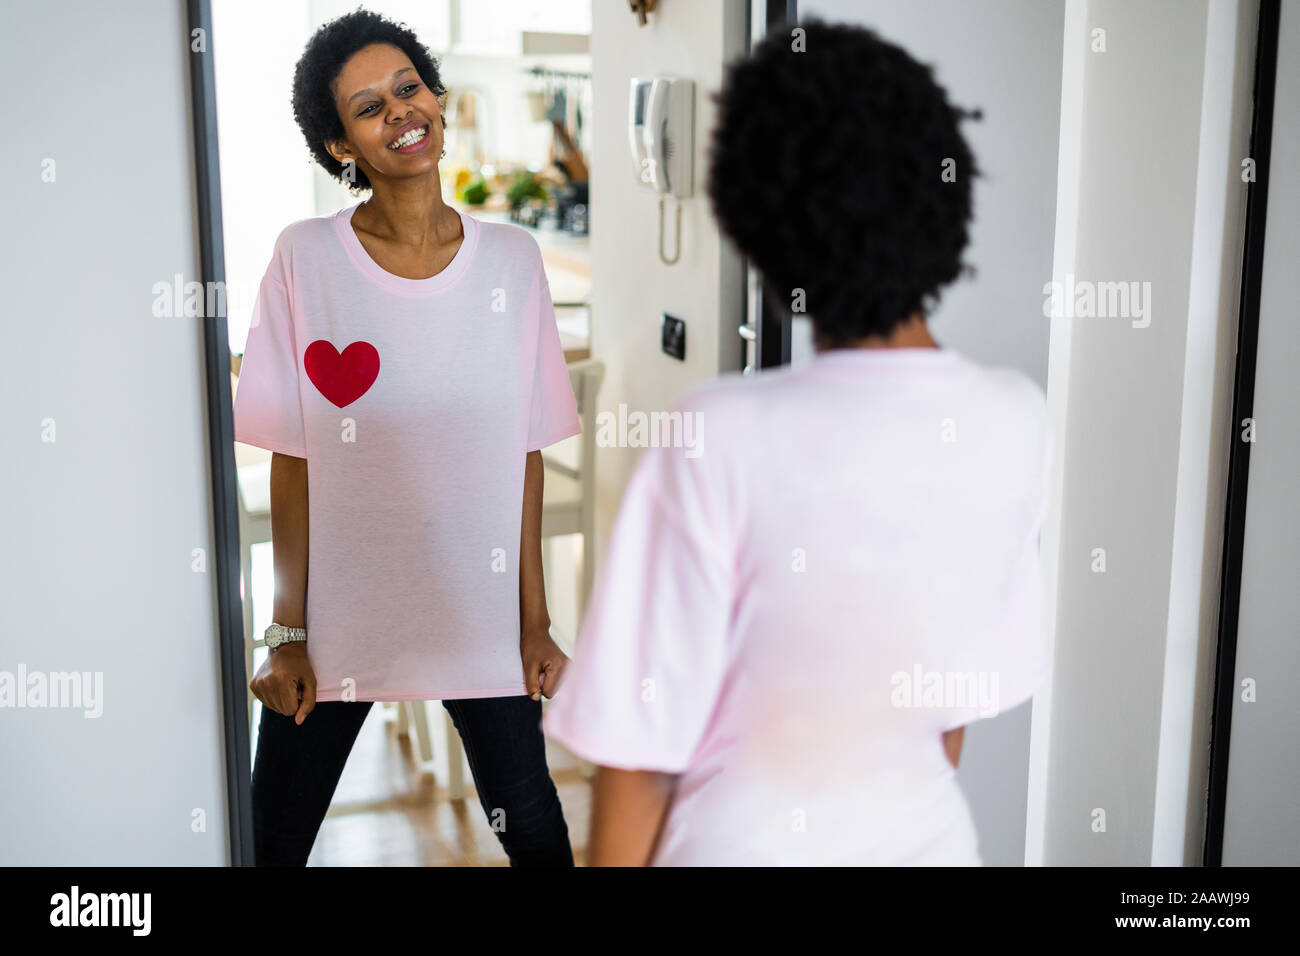 Happy young woman wearing t-shirt with heart shape looking in mirror Stock Photo